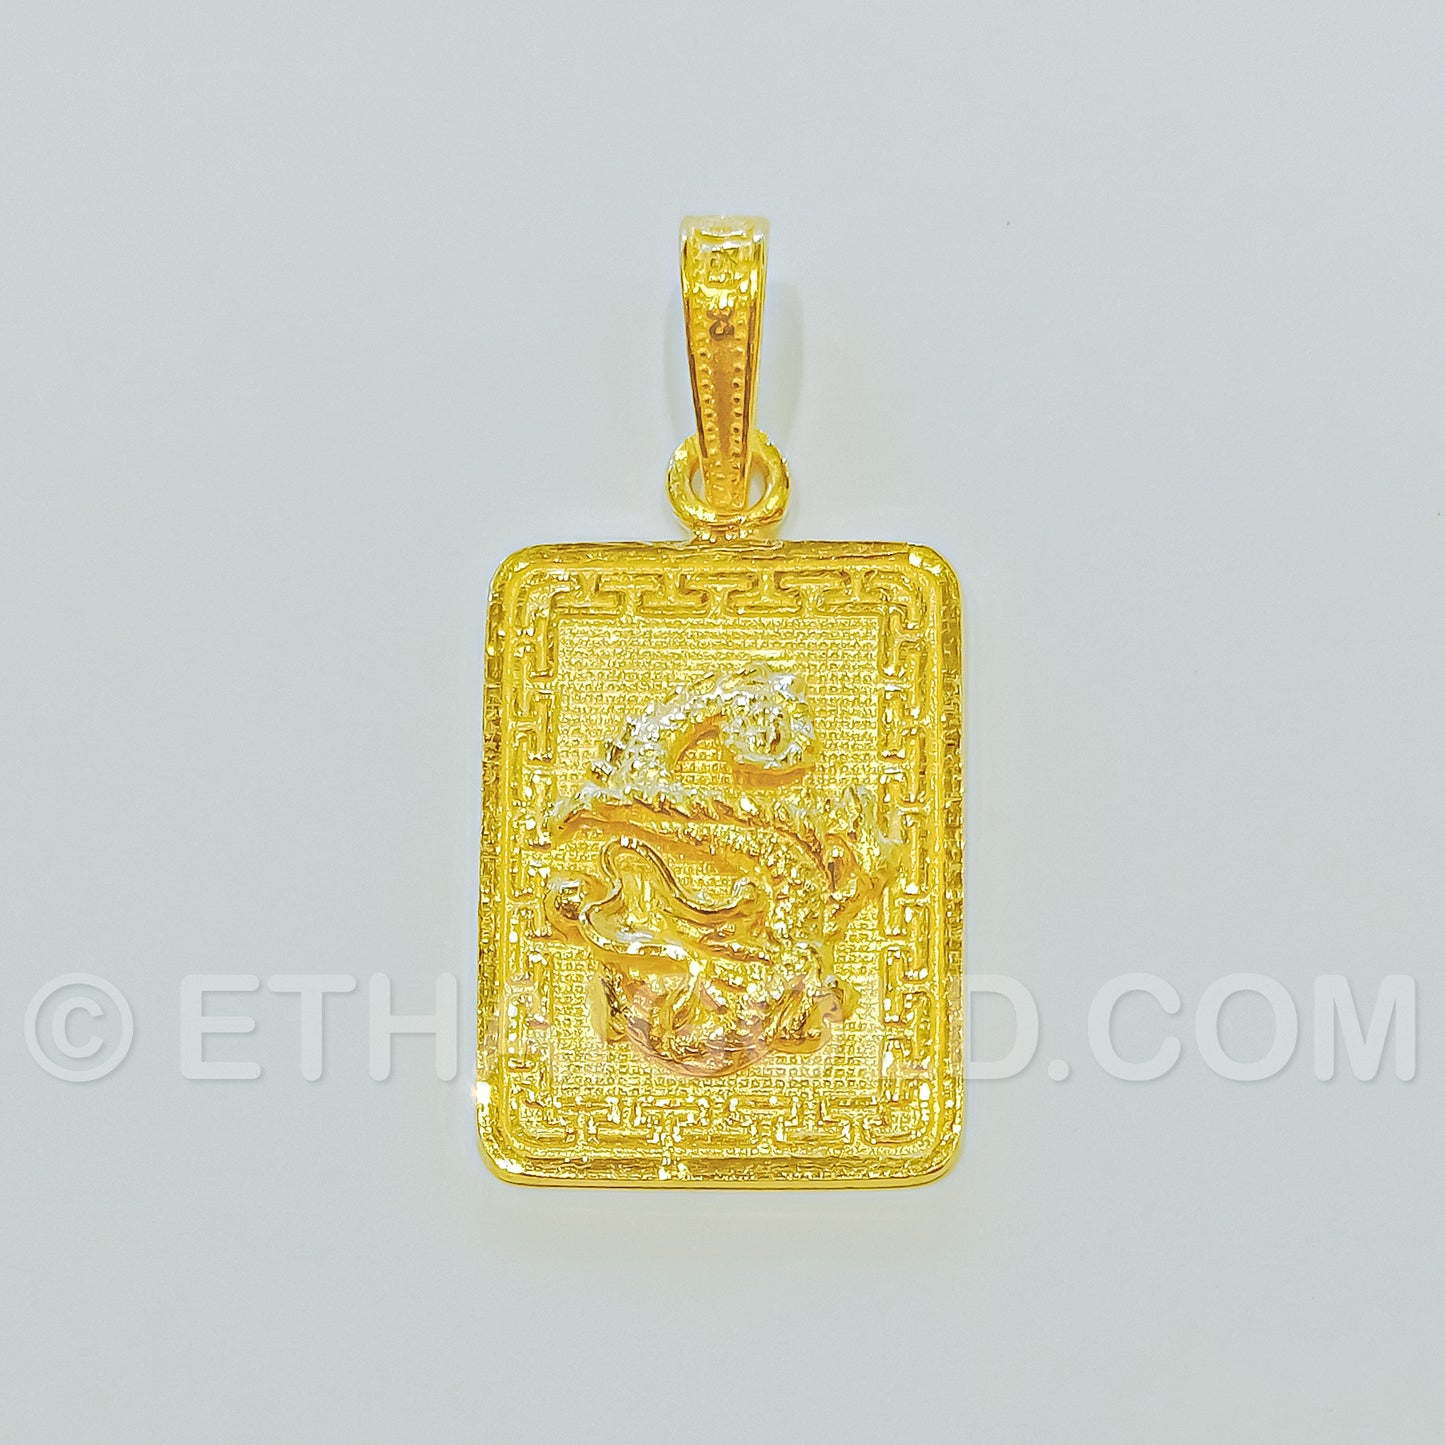 1 BAHT POLISHED MATTE SOLID RECTANGLE DRAGON PENDANT IN 23K GOLD (ID: P0701B)